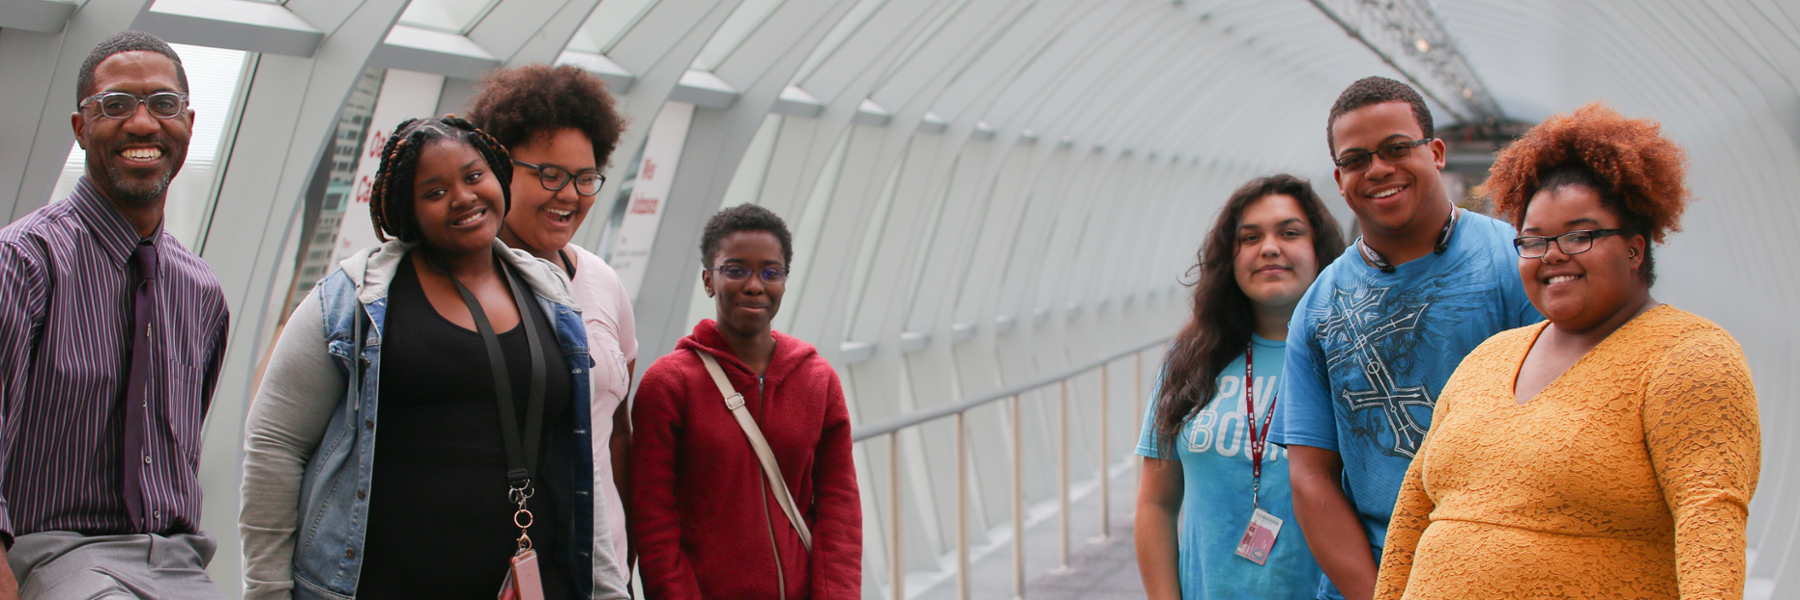 Some students and a professor standing and smiling in skywalk.